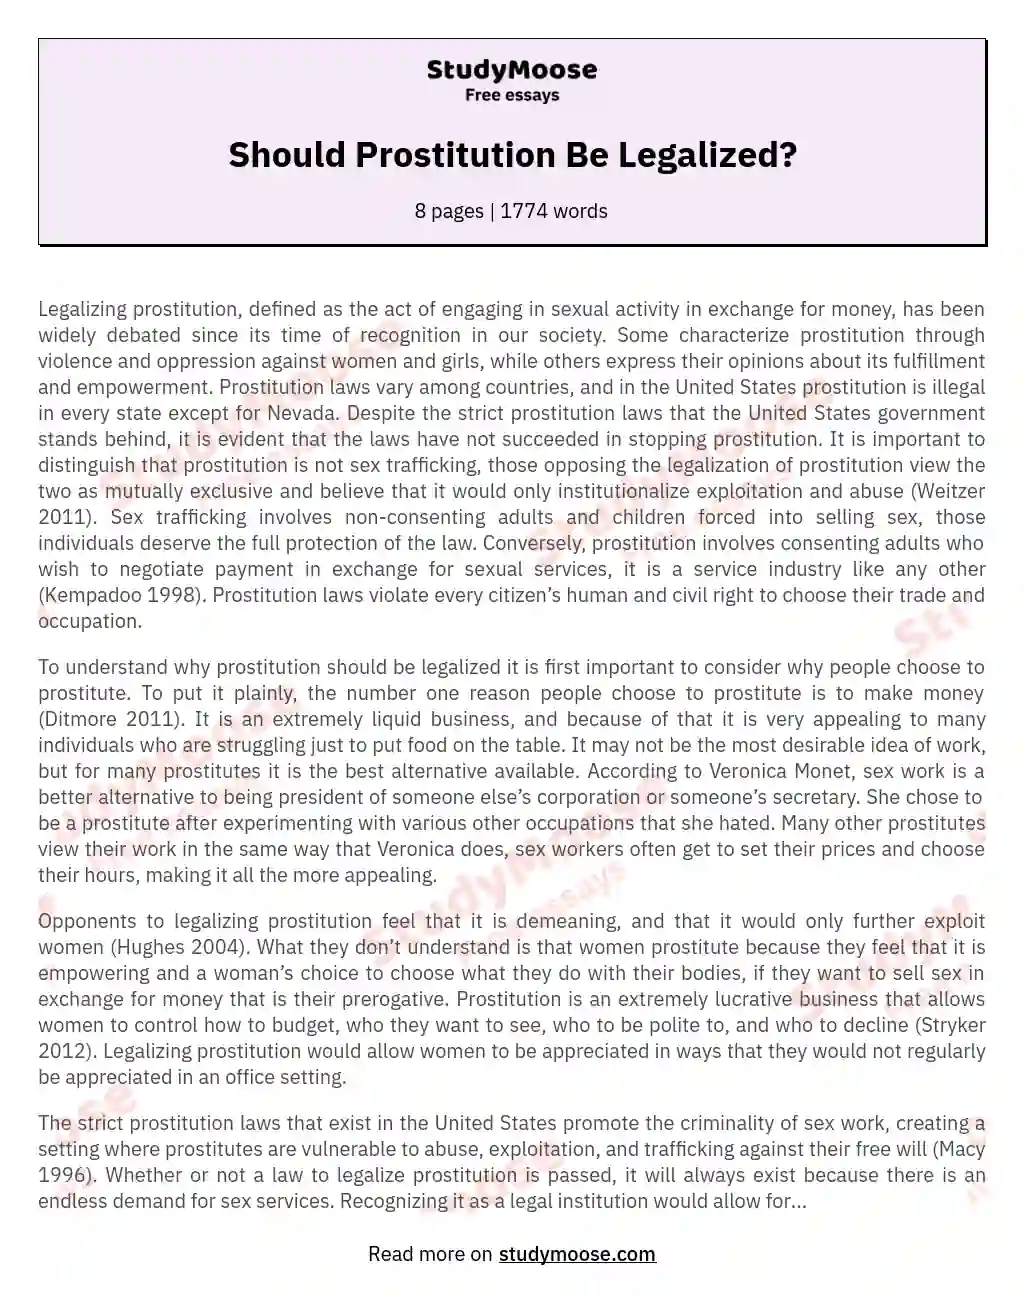 Should Prostitution Be Legalized? essay